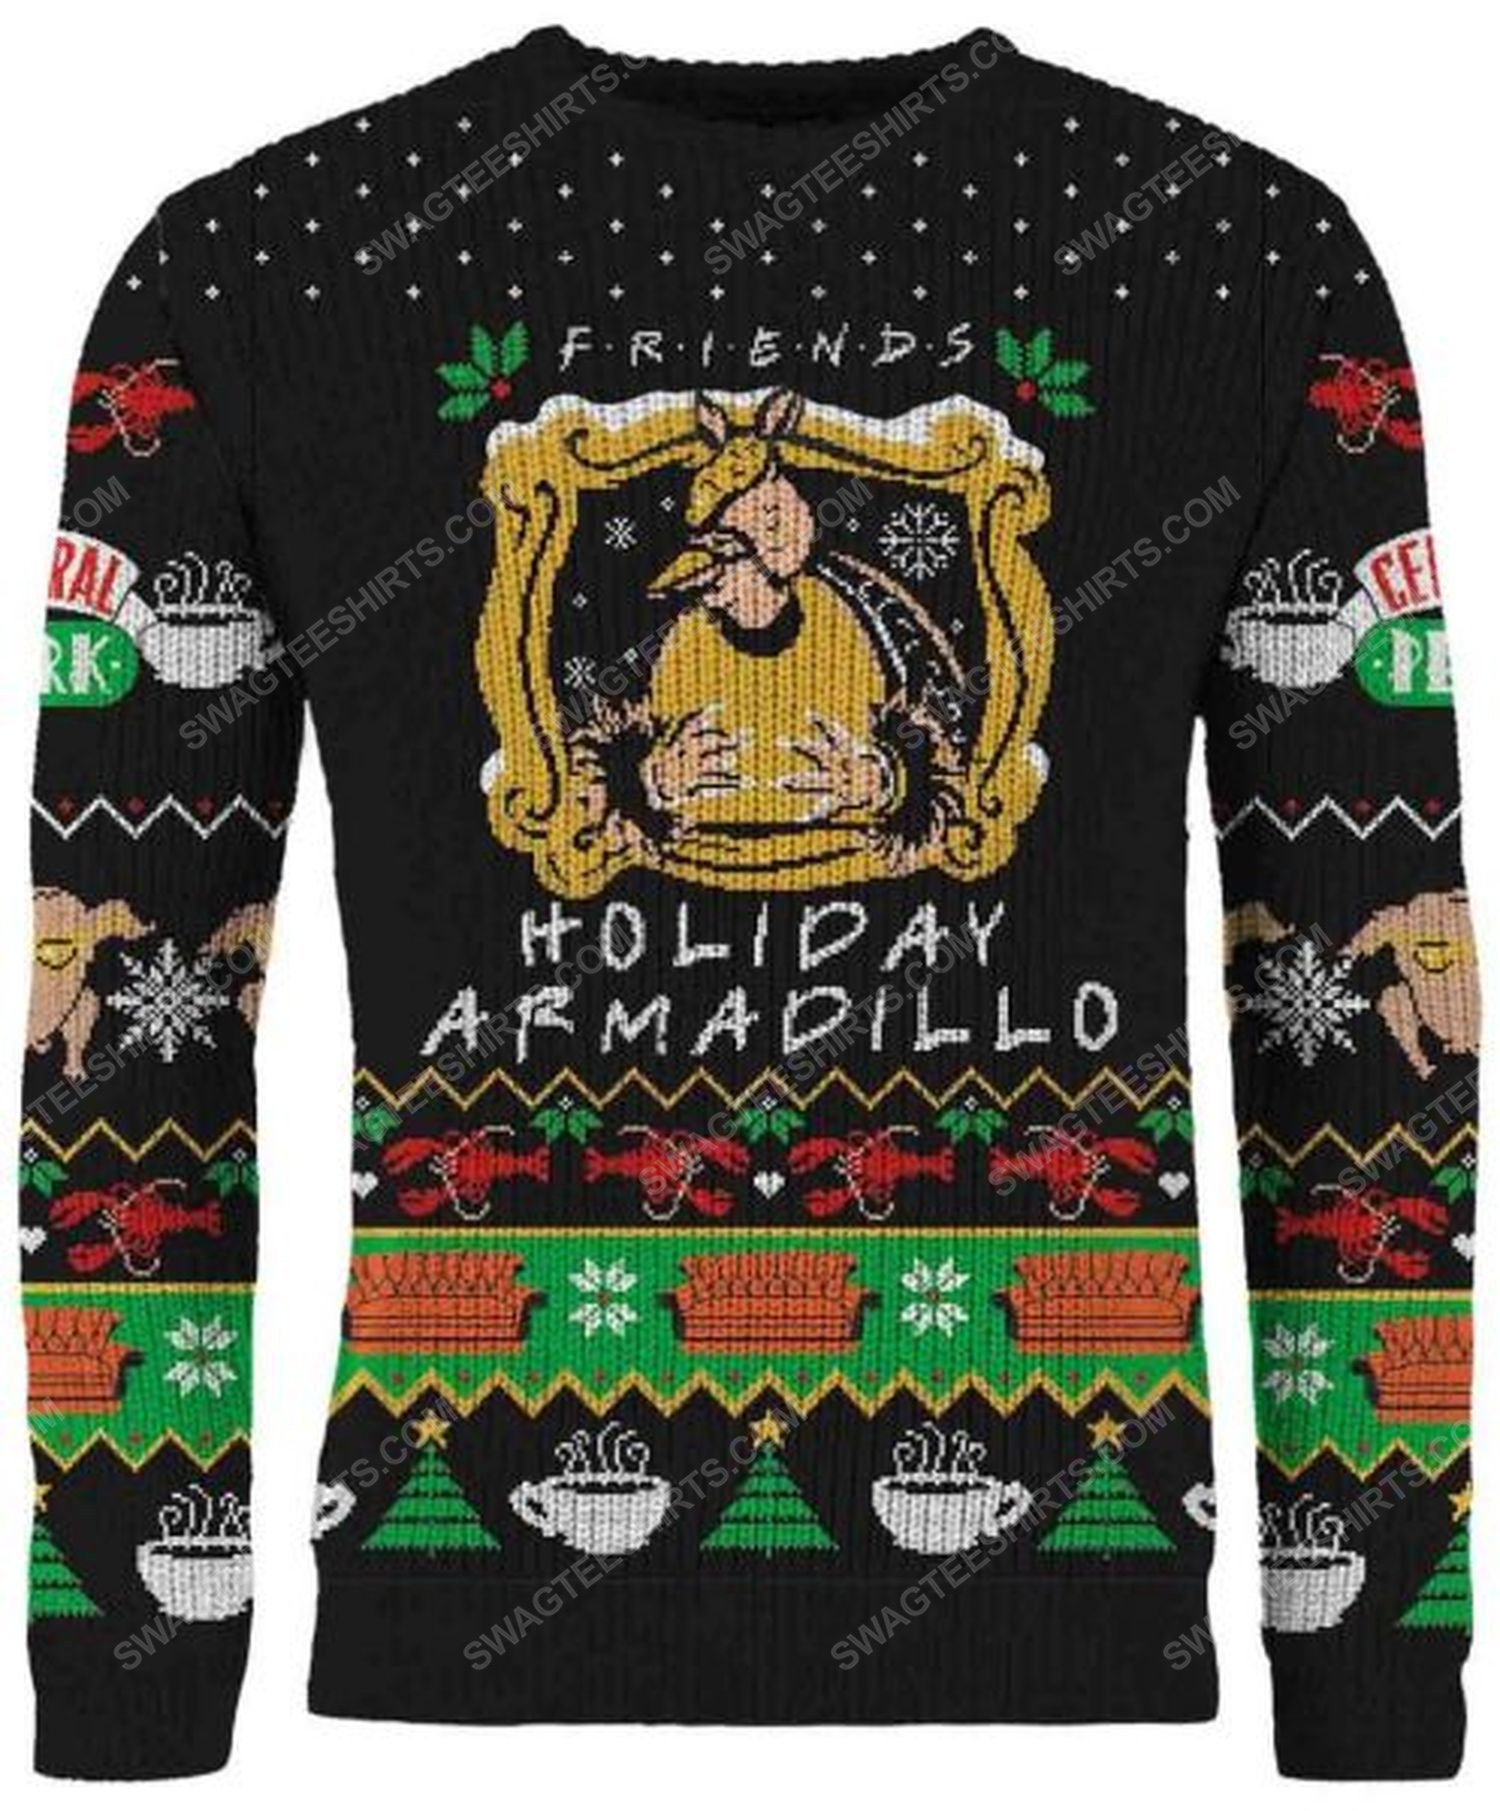 TV show friends holiday armadillo full print ugly christmas sweater 1